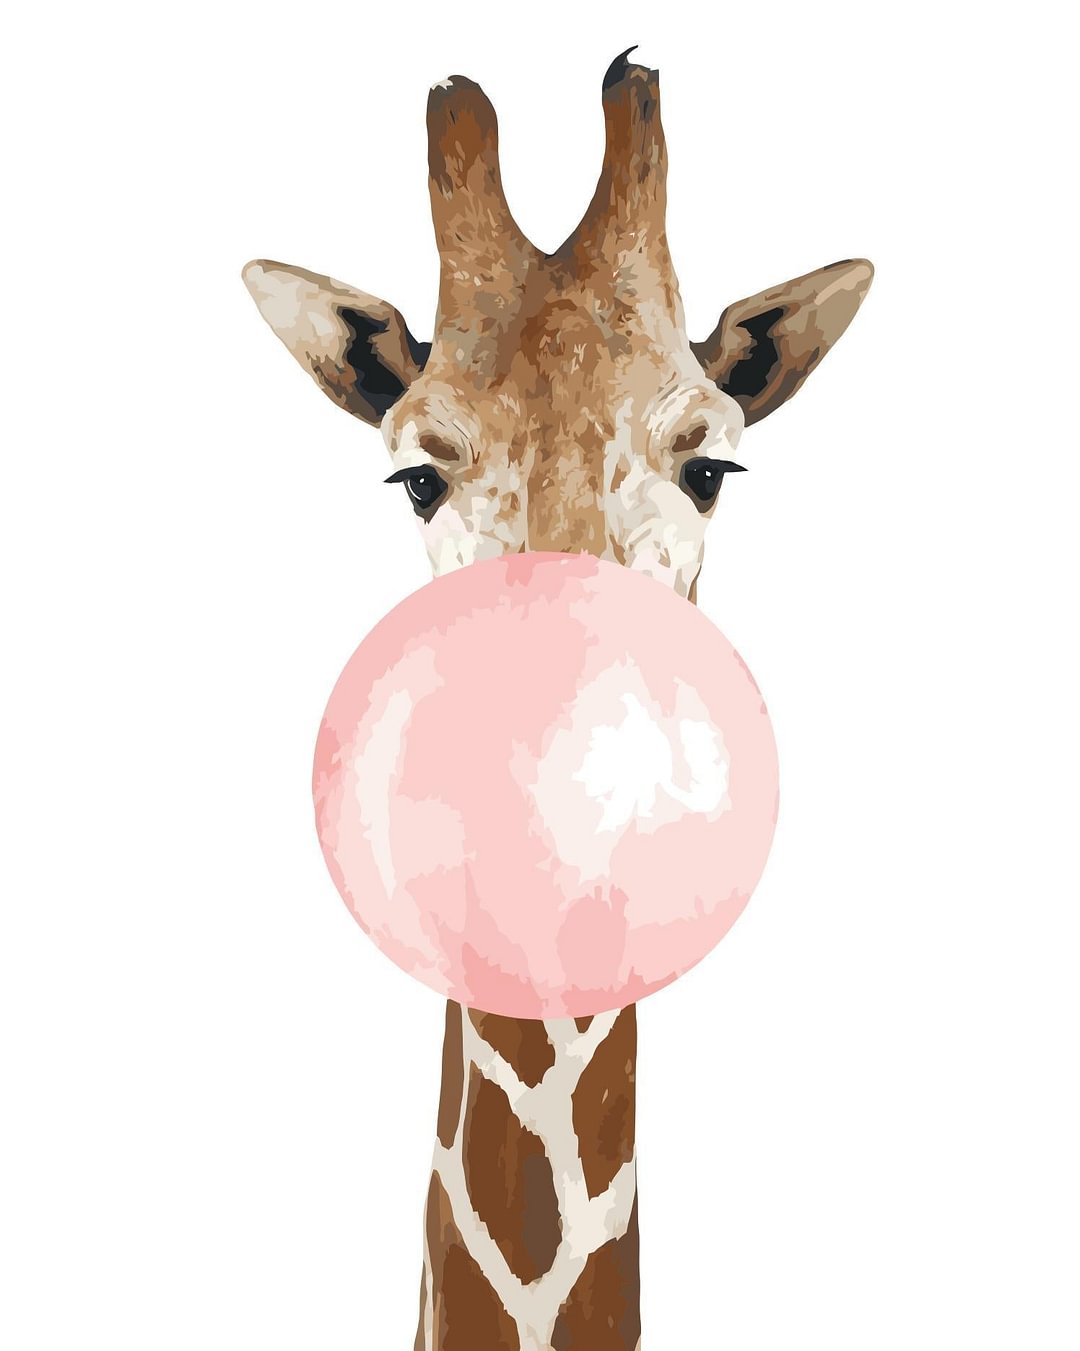 Animal Giraffe Paint By Numbers Kits UK For Beginners HQD1236